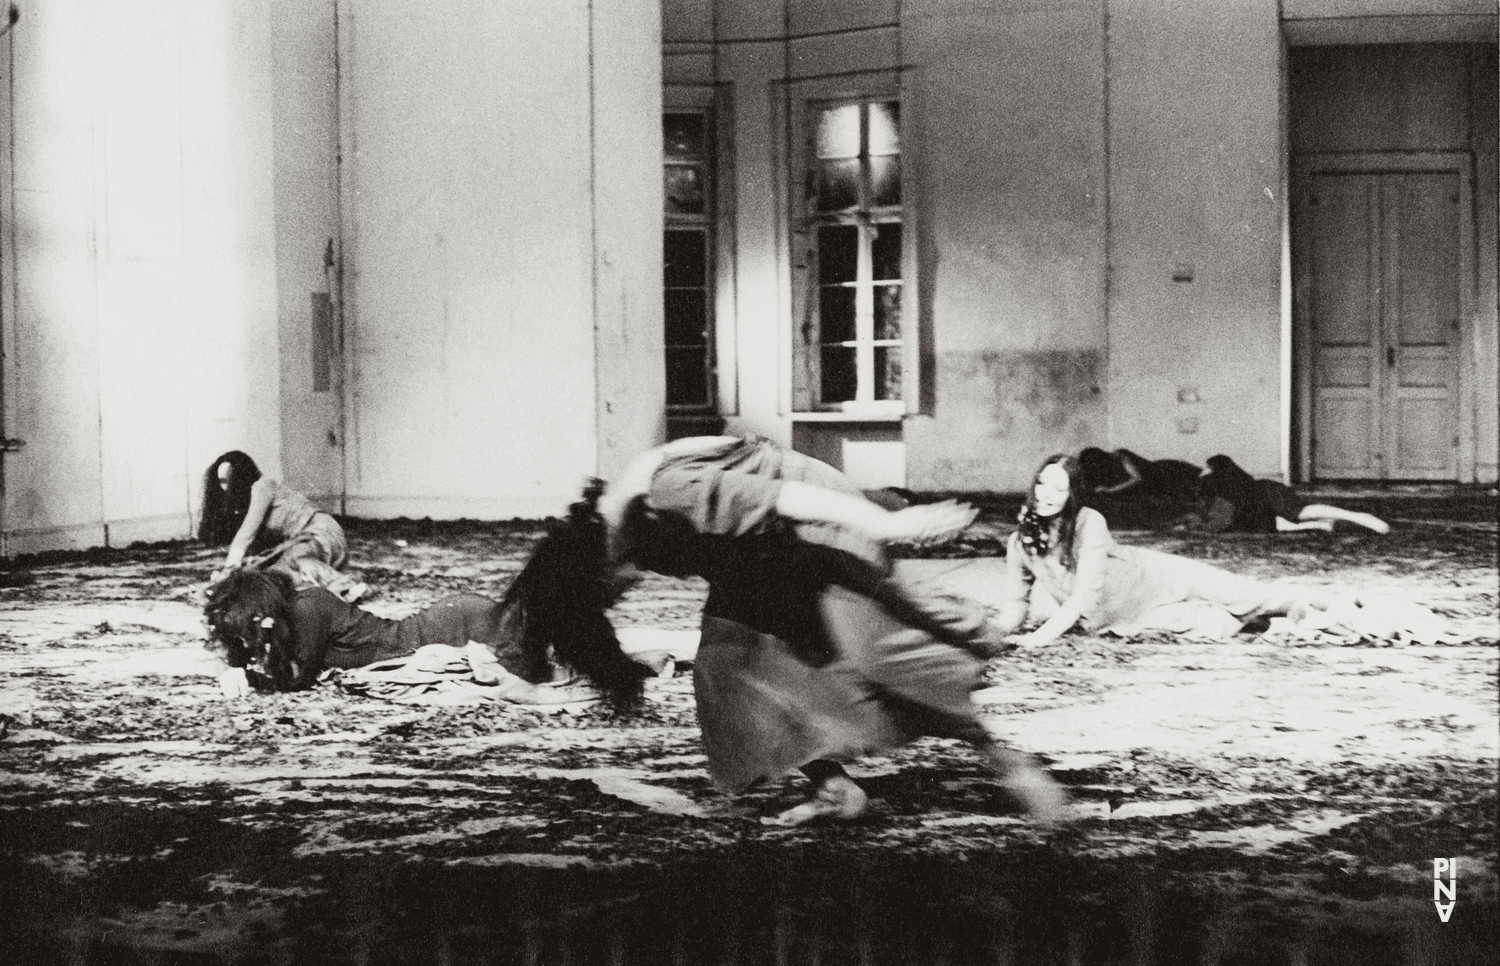 Beatrice Libonati and Heide Tegeder in “Bluebeard. While Listening to a Tape Recording of Béla Bartók's Opera "Duke Bluebeard's Castle"” by Pina Bausch